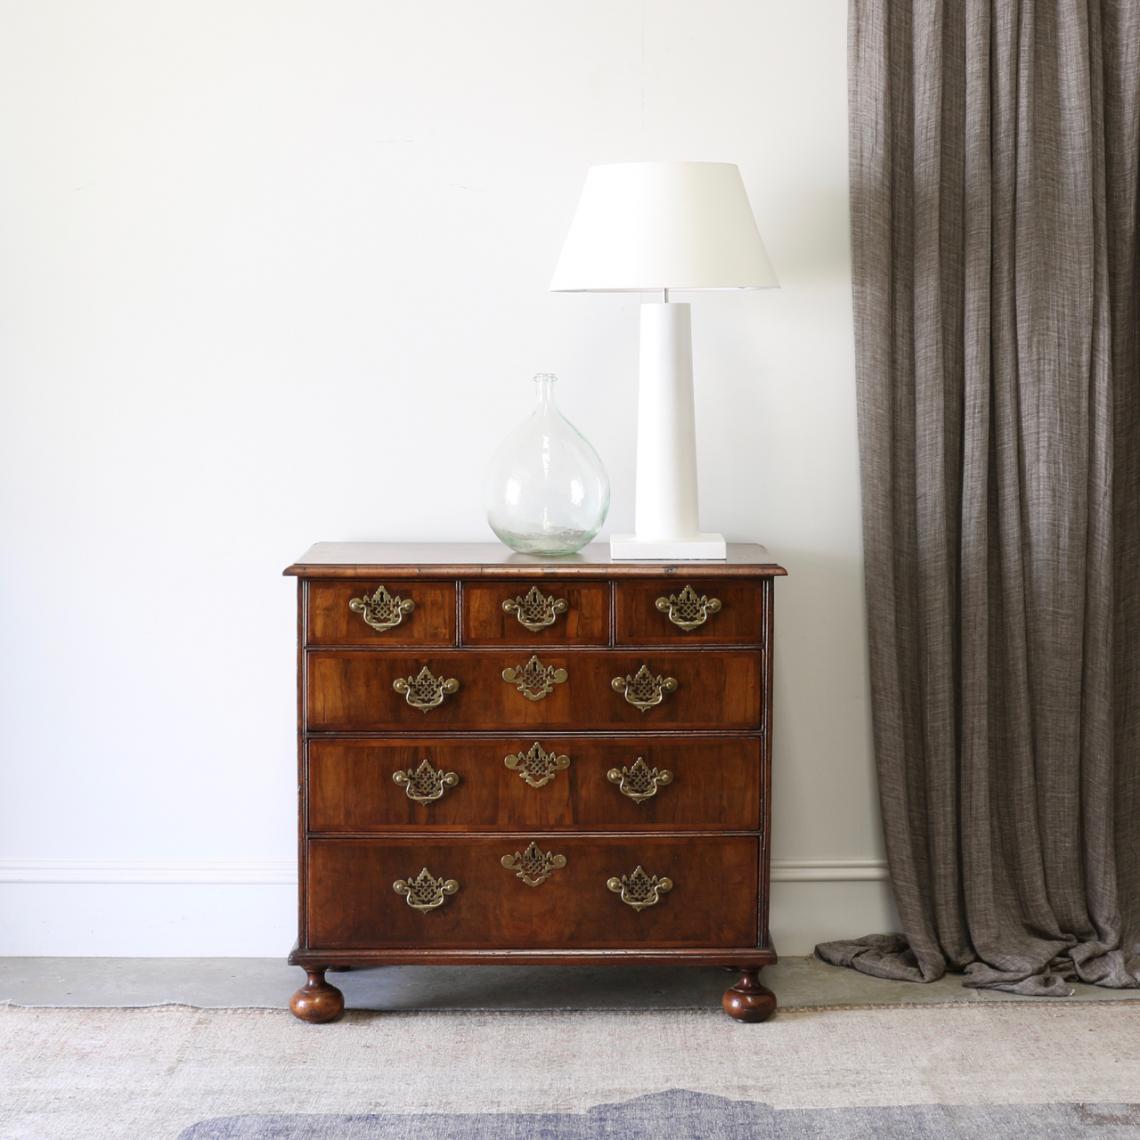 110-75 - Walnut Chest of Drawers